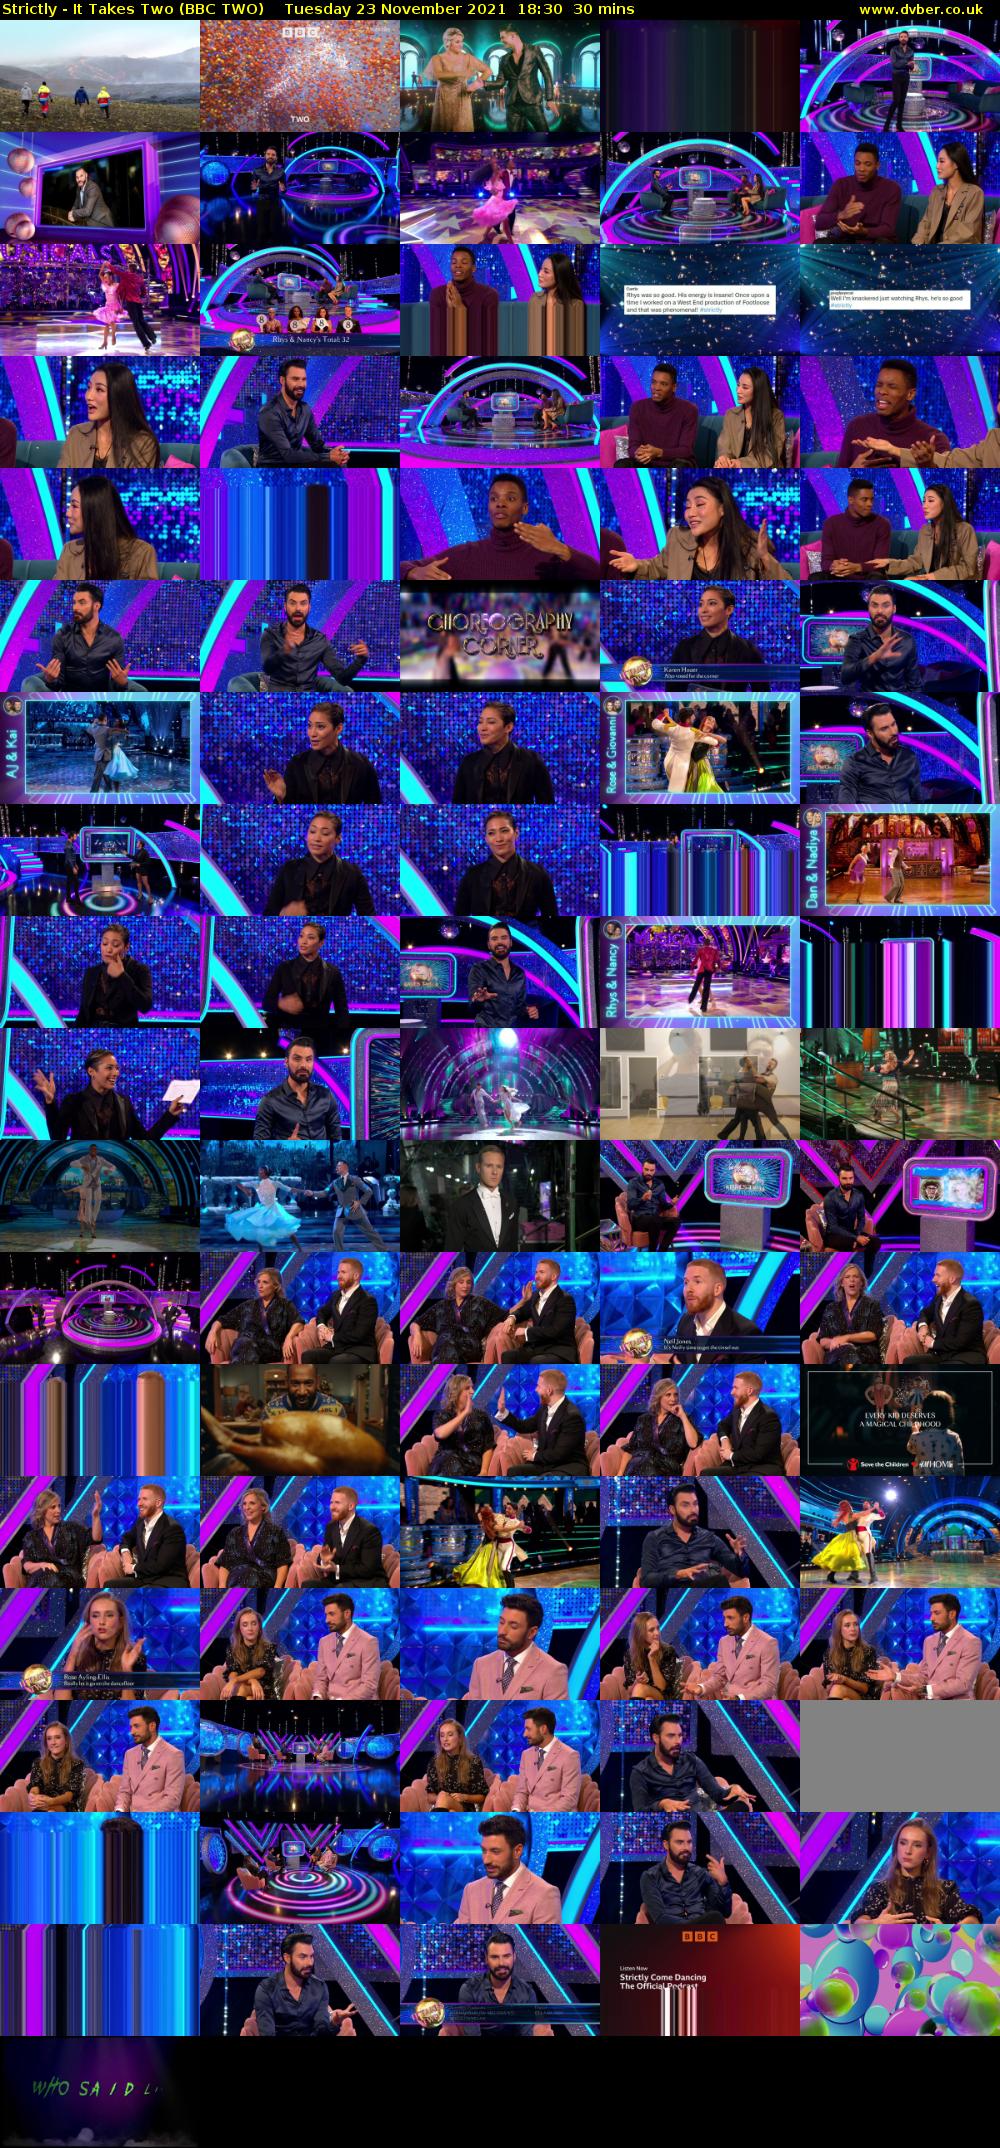 Strictly - It Takes Two (BBC TWO) Tuesday 23 November 2021 18:30 - 19:00